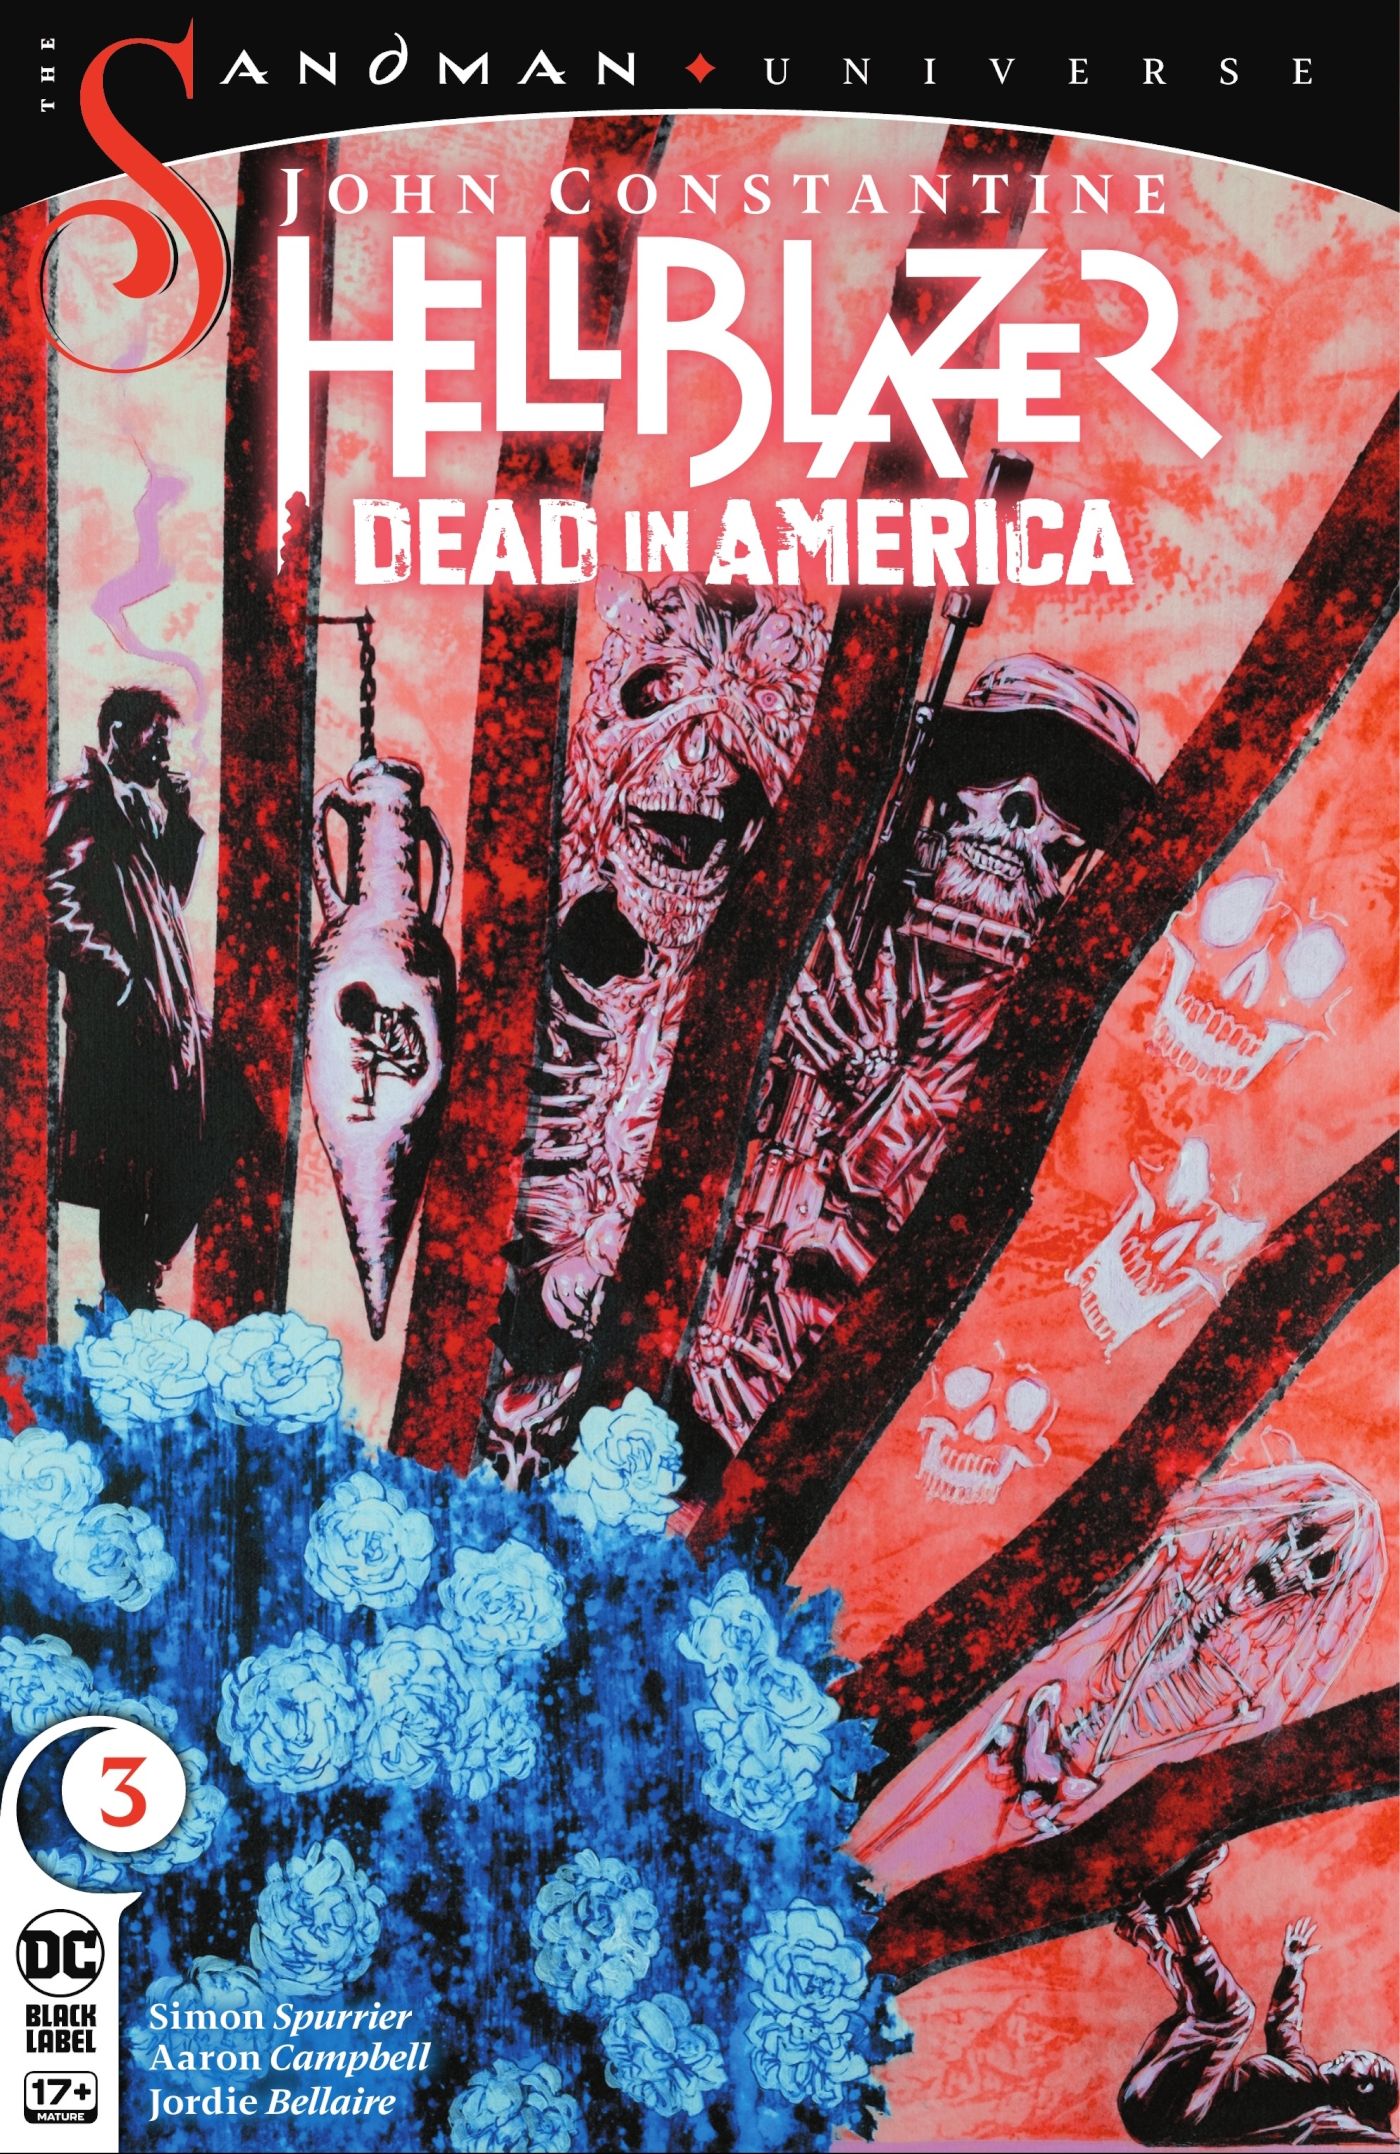 John Constantine Hellblazer Dead in America 3 Main Cover: blue flowers surrounded by corpses.